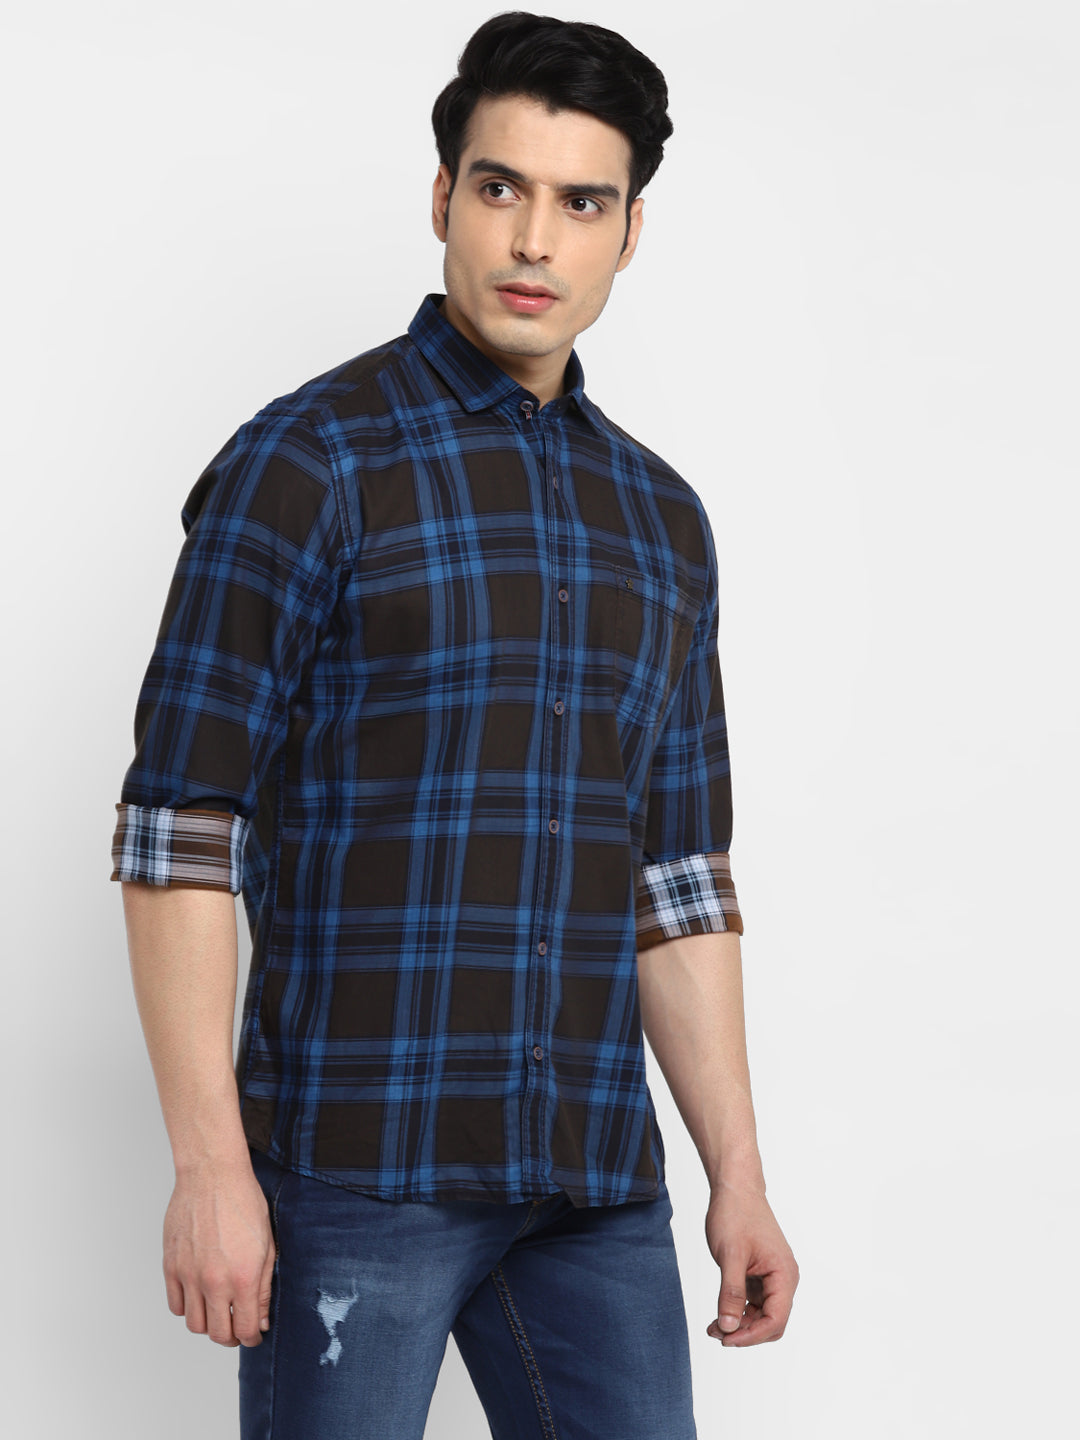 Checked Blue & Black Slim Fit Casual Shirt For Men